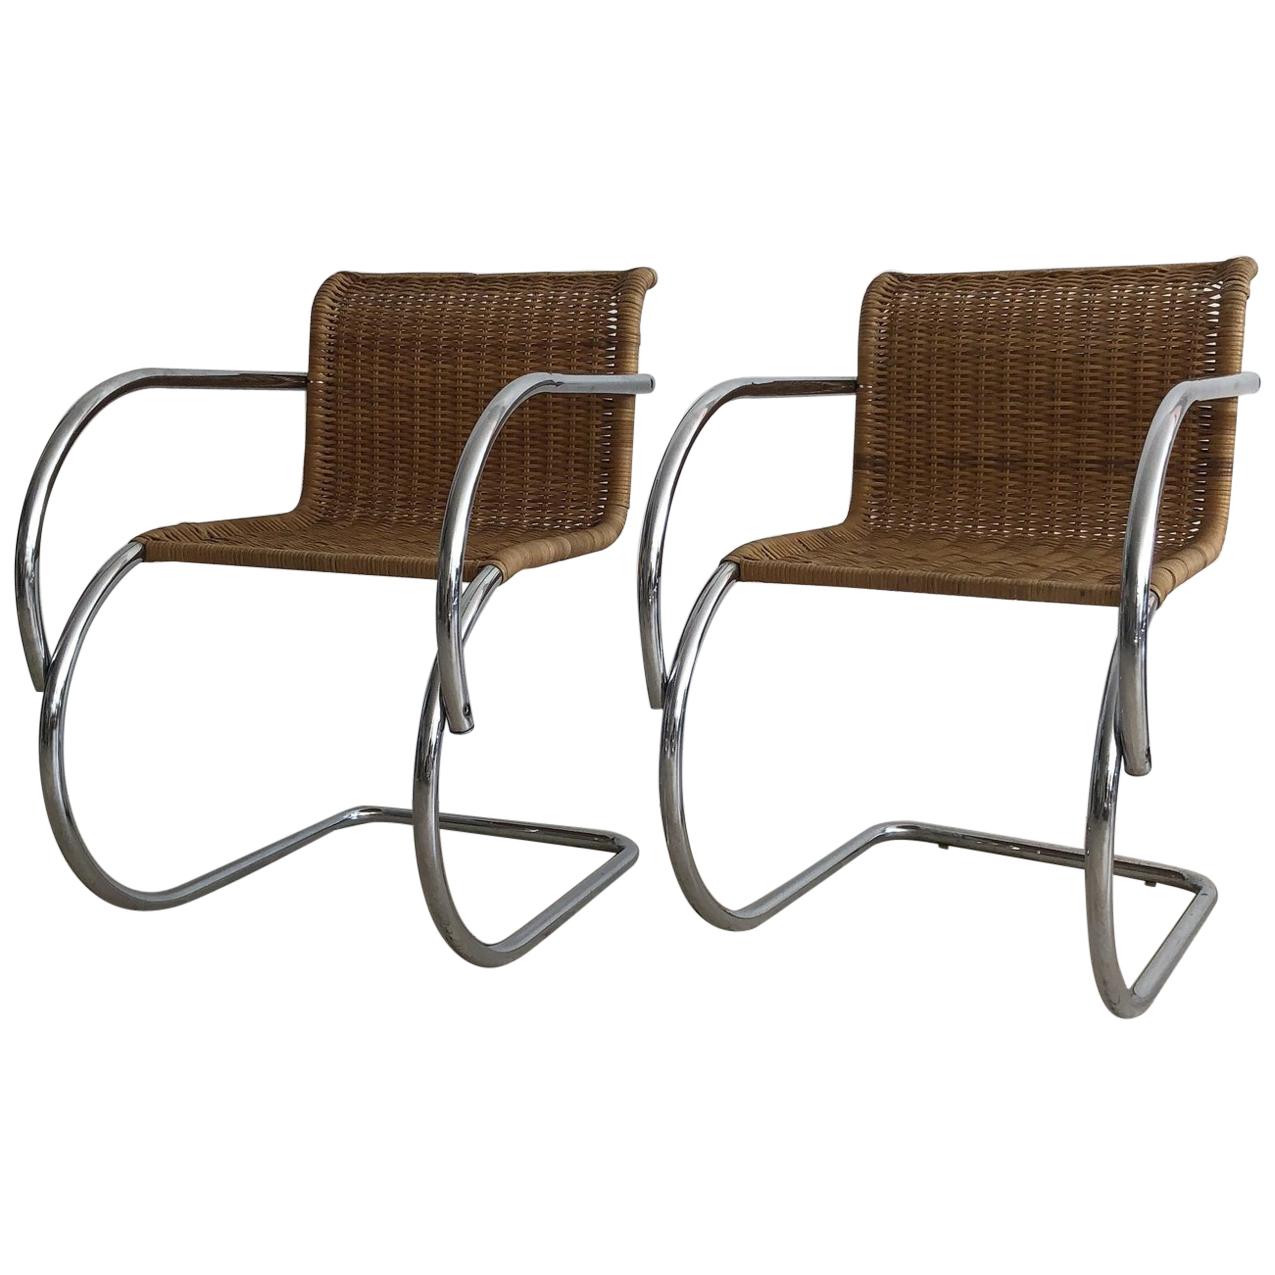 1970s Wicker MR Cantilever Armchairs in the Style of Mies van der Rohe, Pair